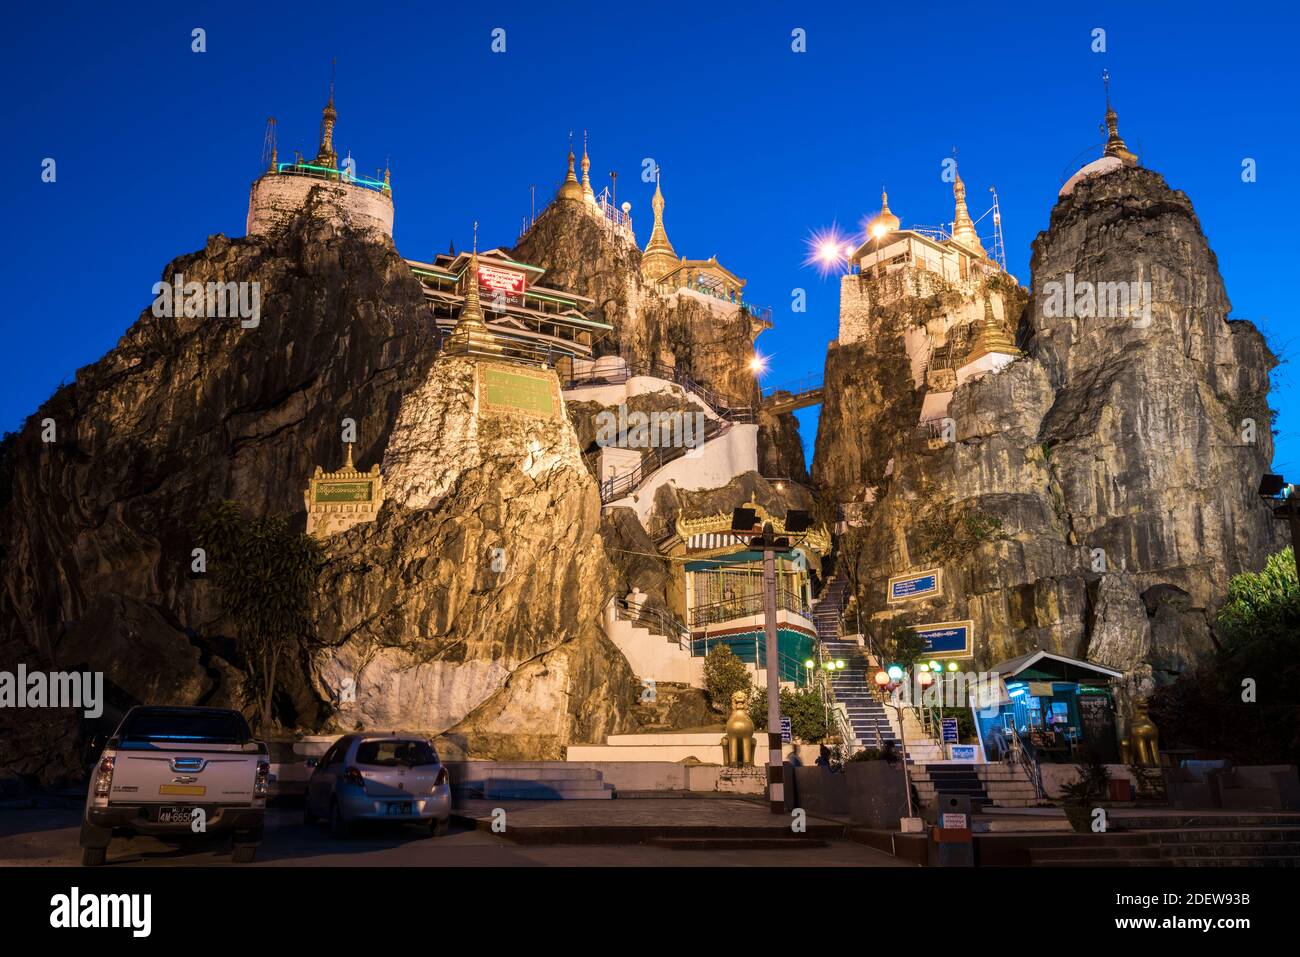 Illuminated Taung Kwe Pagoda against clear blue sky at twilight, Loikaw, Myanmar Stock Photo